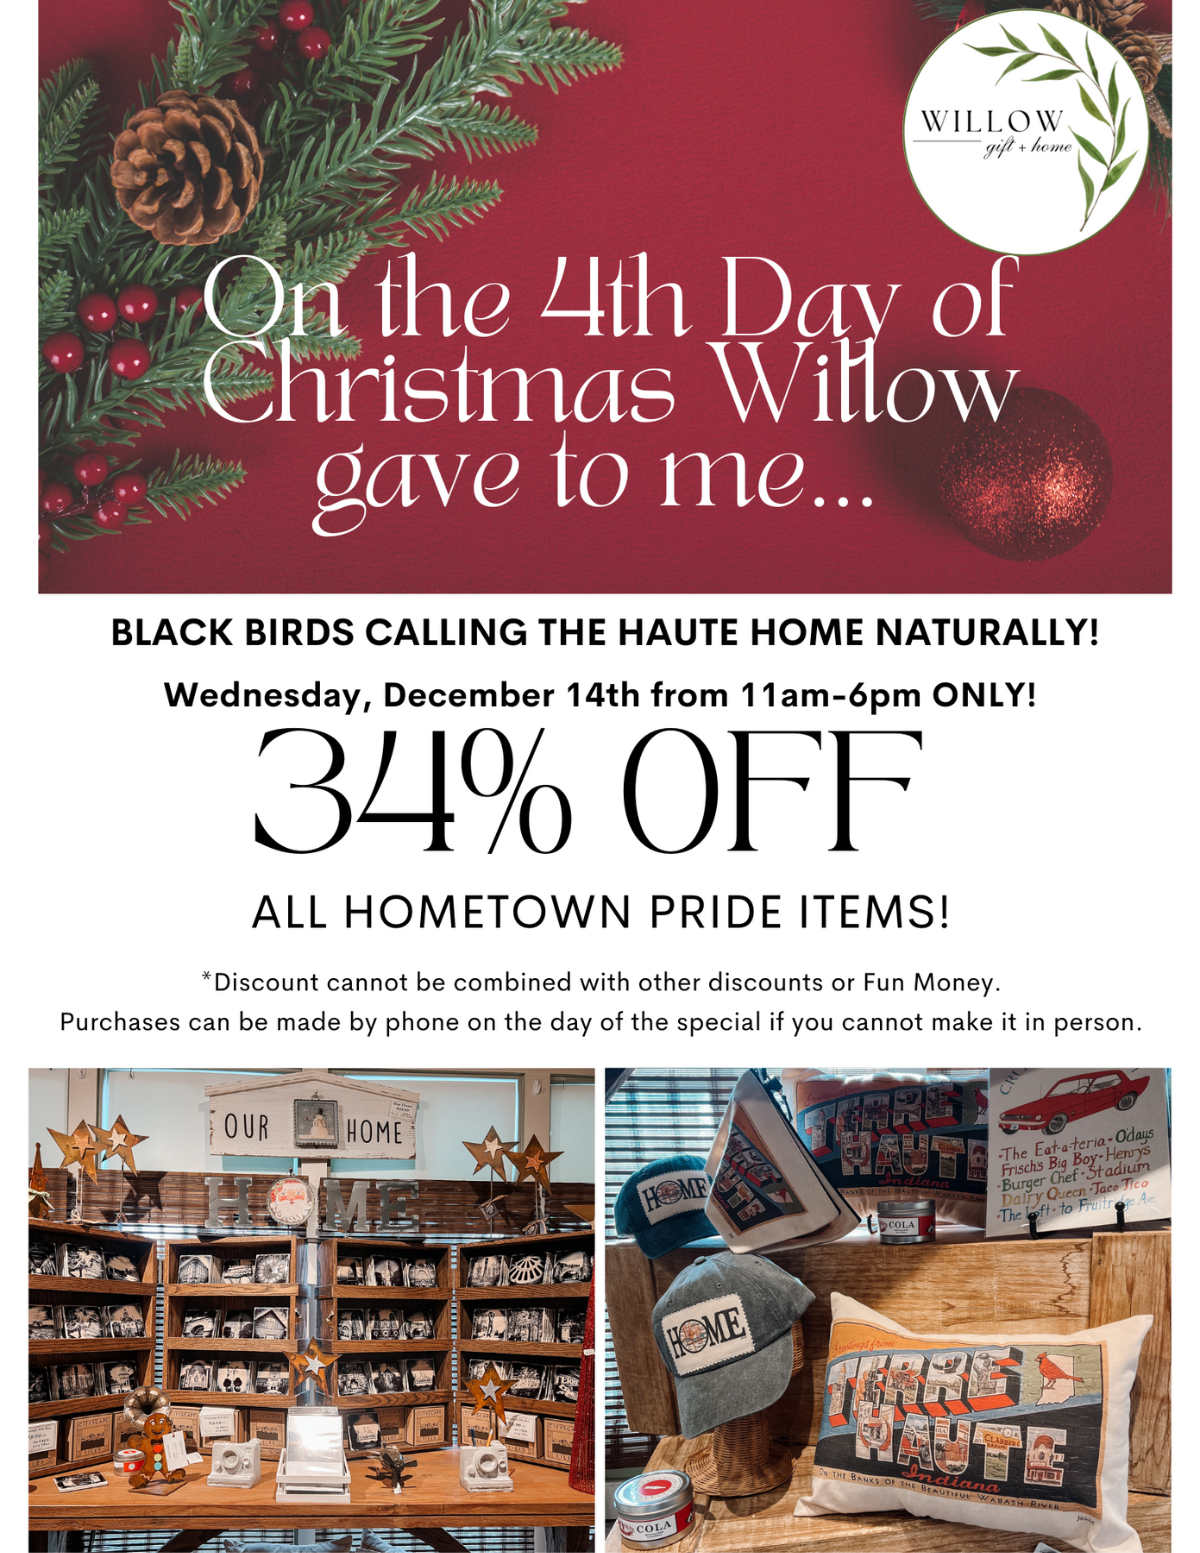 12 Days Of Christmas Sale - 4Th Day Of Christmas Willow Gave To Me ... –  Willow Gift & Home